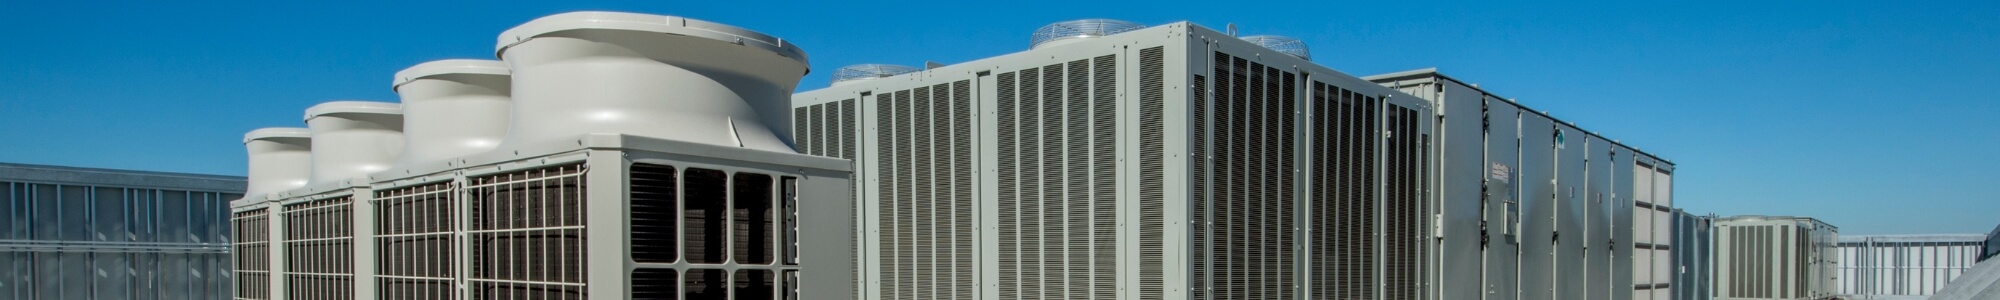 HVAC services in Barrie